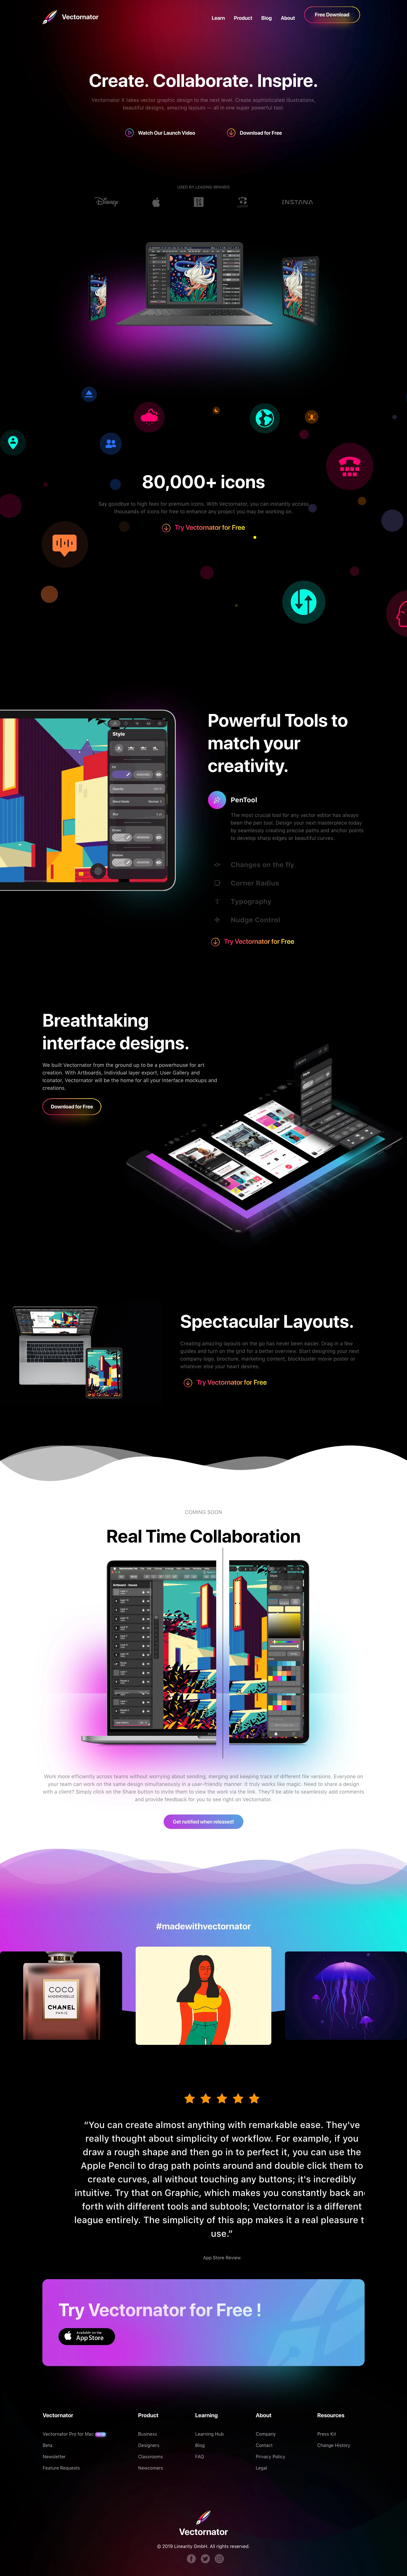 Vectornator Landing Page Example: Vectornator X takes vector graphic design to the next level. Create sophisticated illustrations, beautiful designs, amazing layouts — all in one super powerful tool.